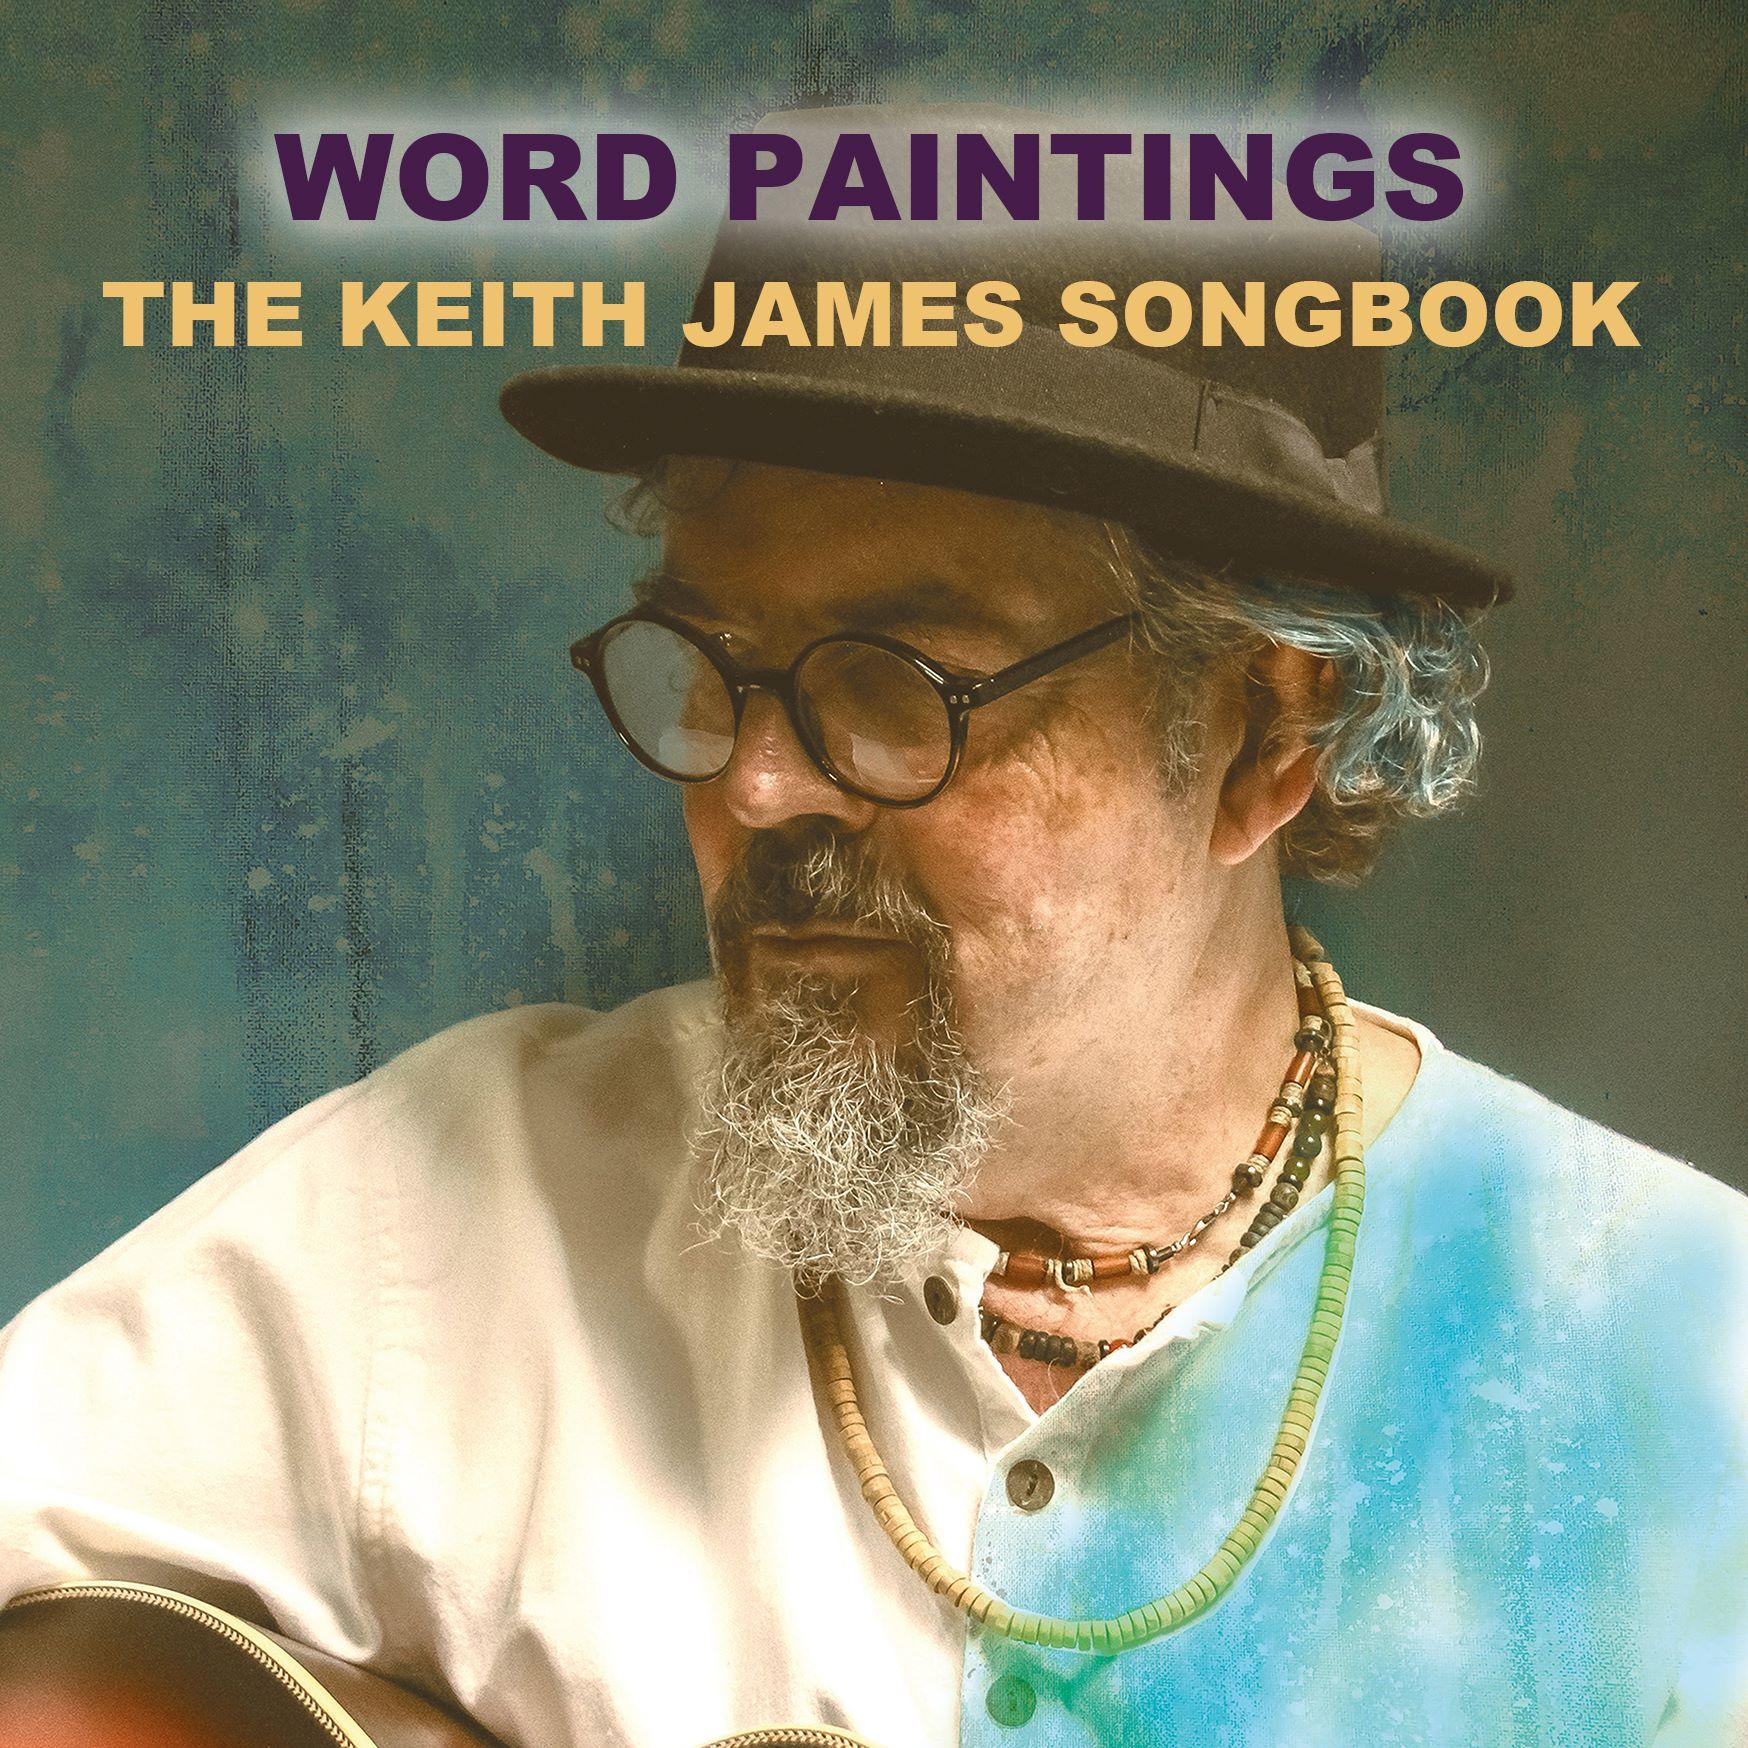 WORD PAINTINGS - THE KEITH JAMES SONGBOOK